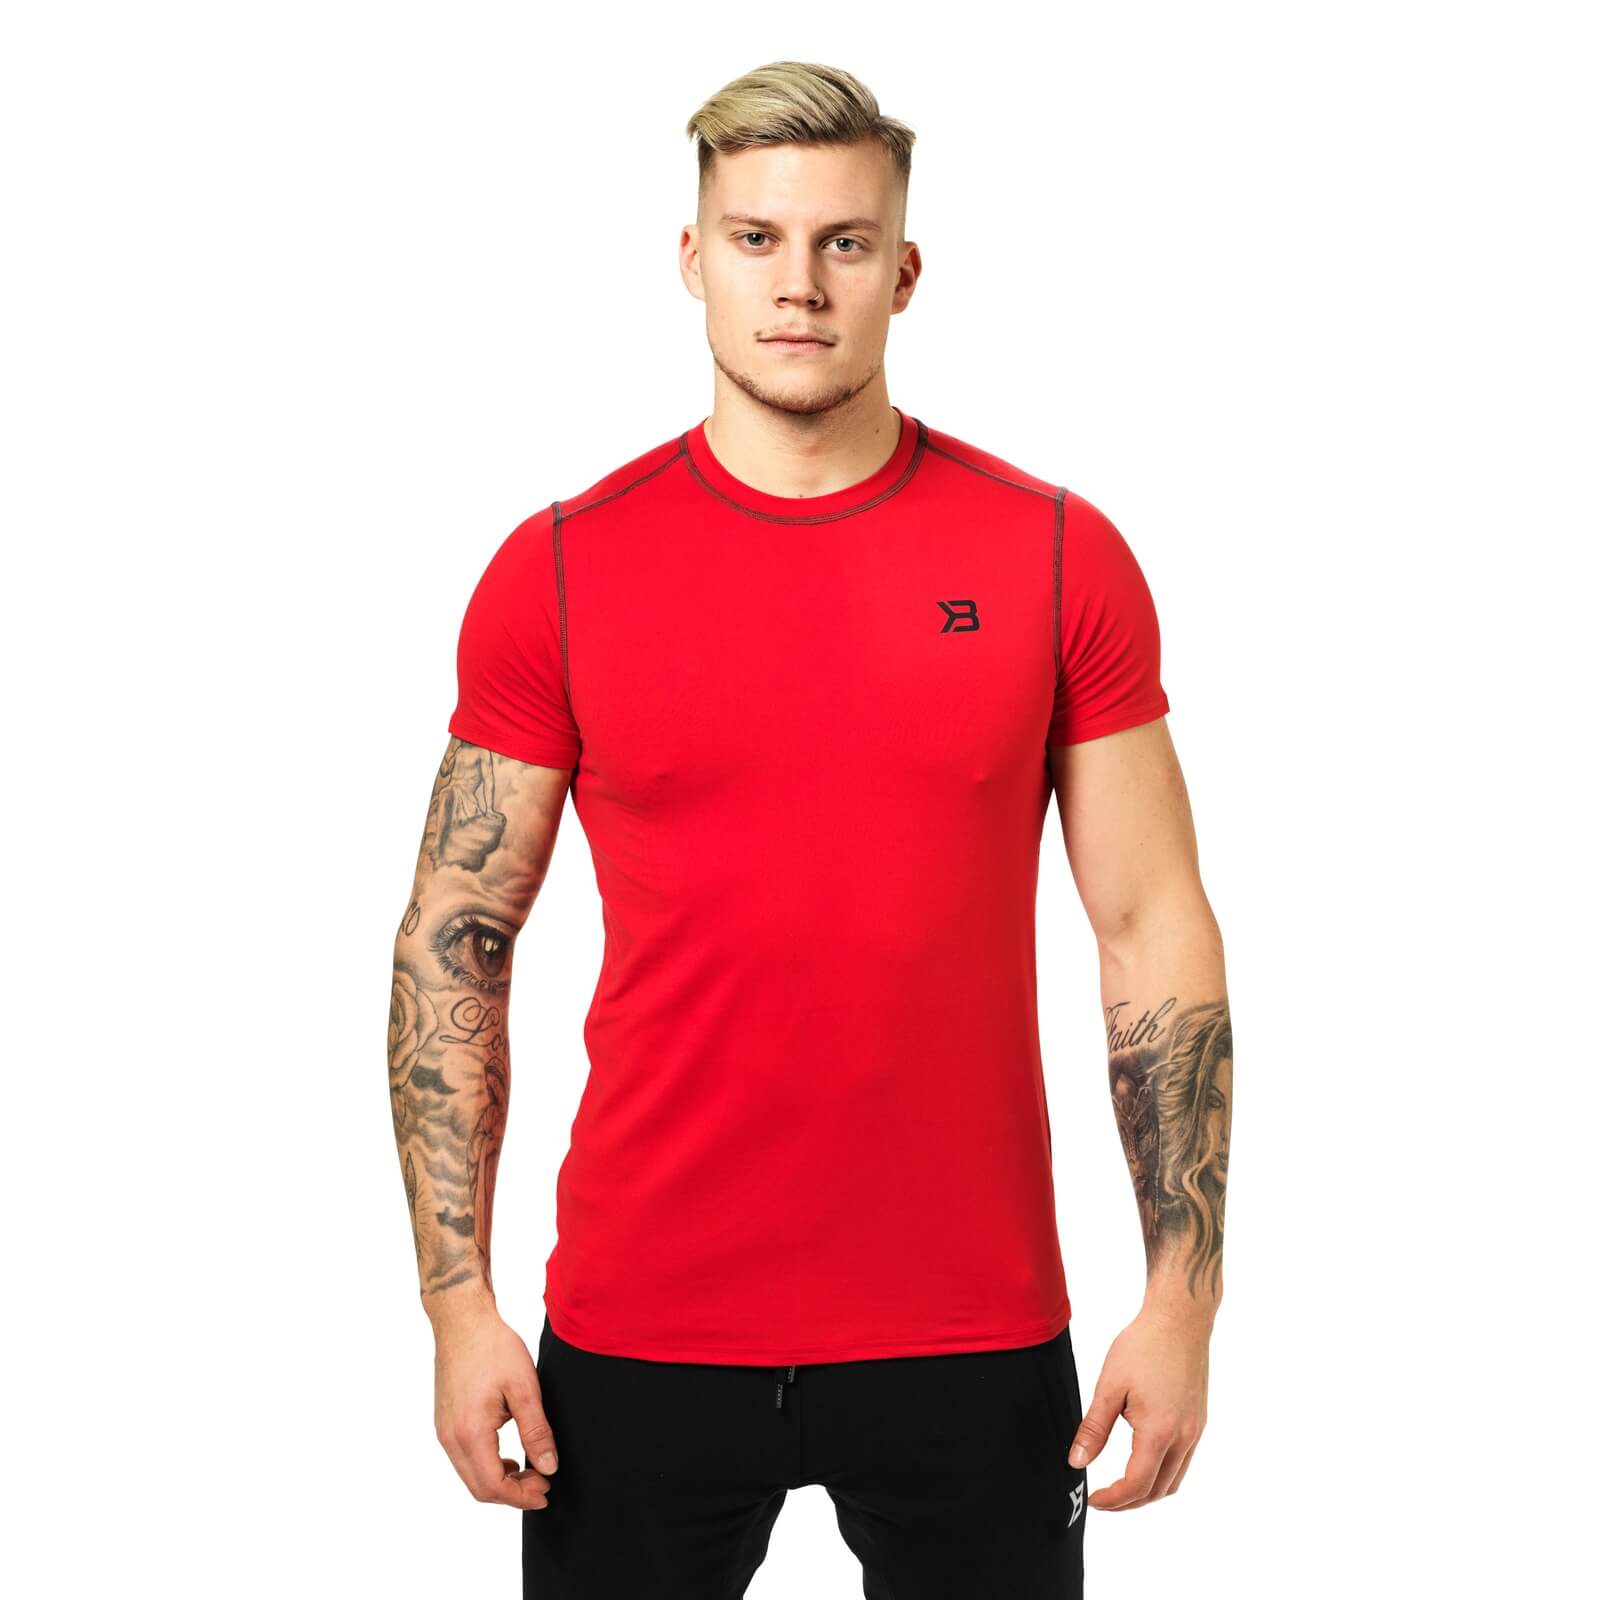 Performance Tee, bright red, Better Bodies